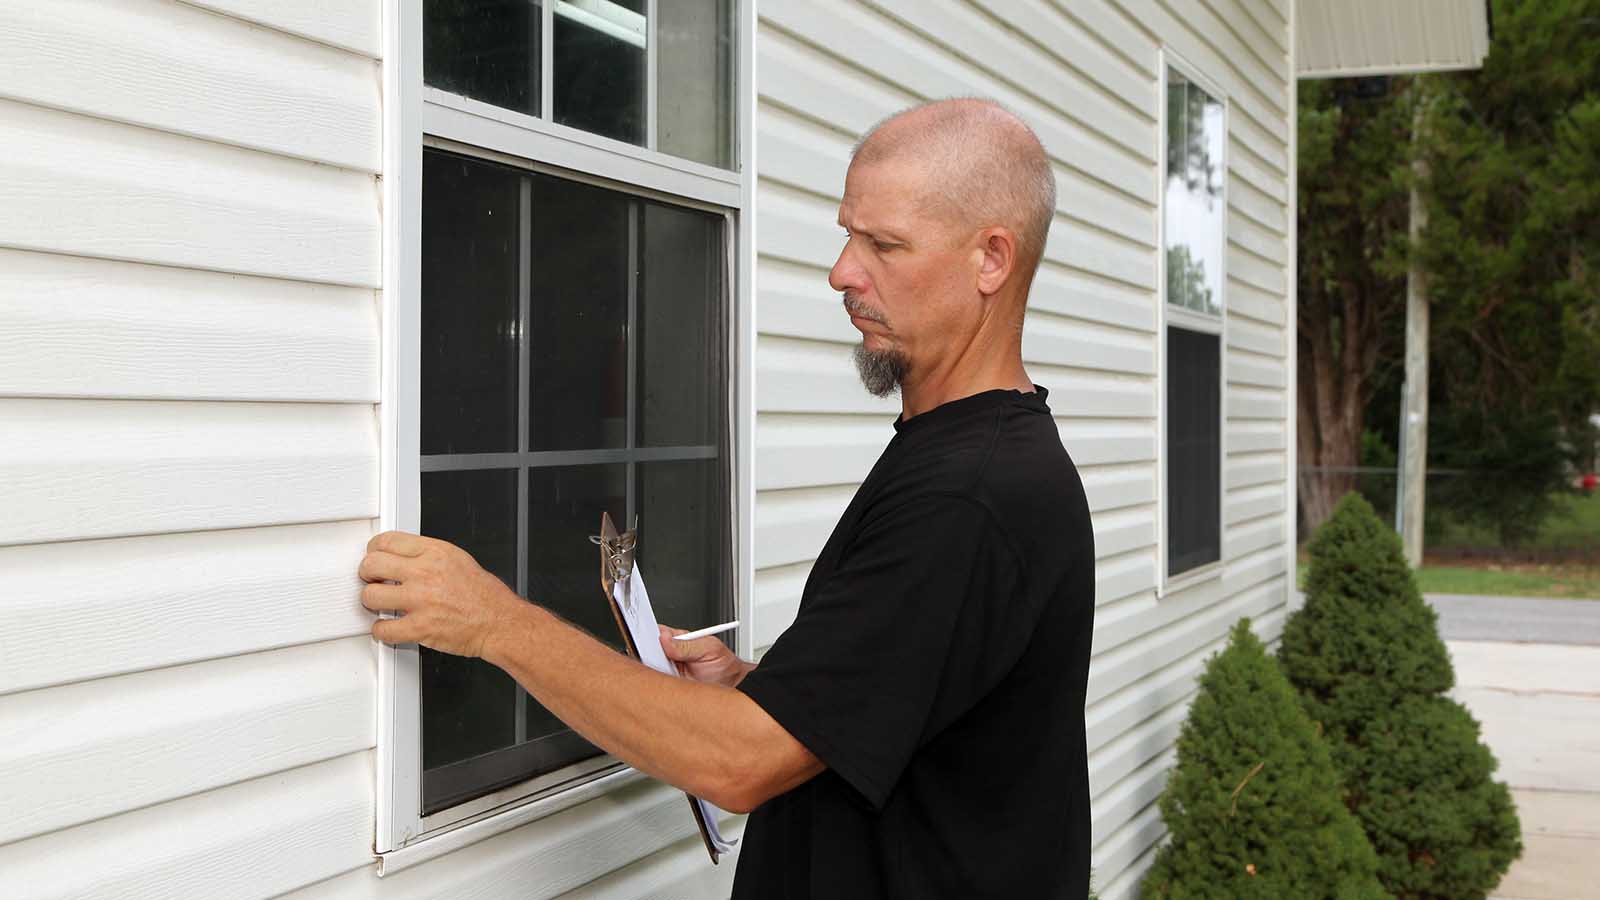 Home inspector examining windows for a new home owner.